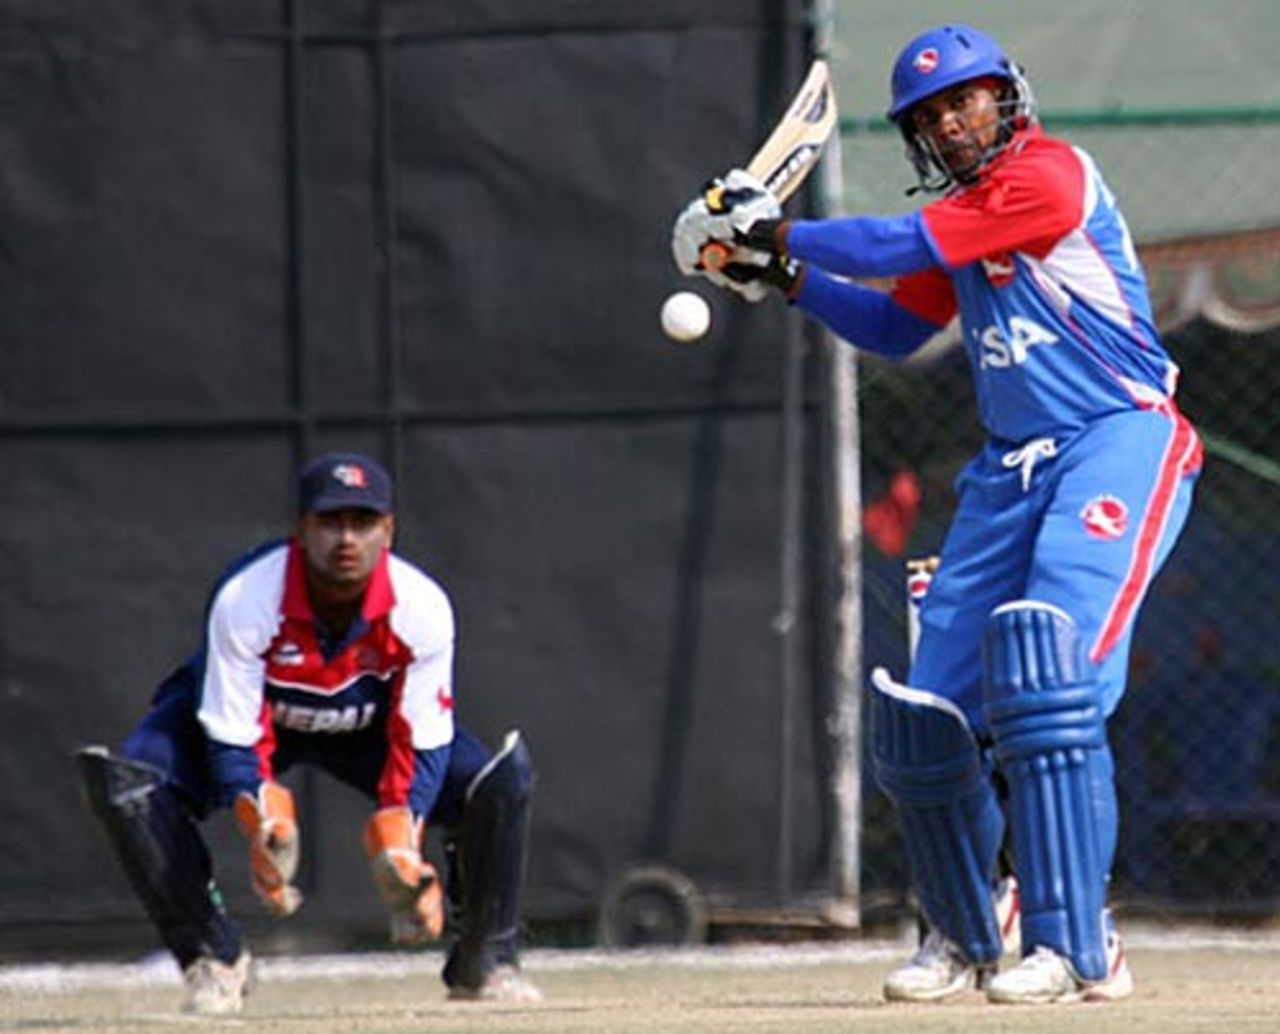 Steve Massiah shapes up to pull, Nepal v USA, ICC World Cricket League Division 5 final, February 27, 2010